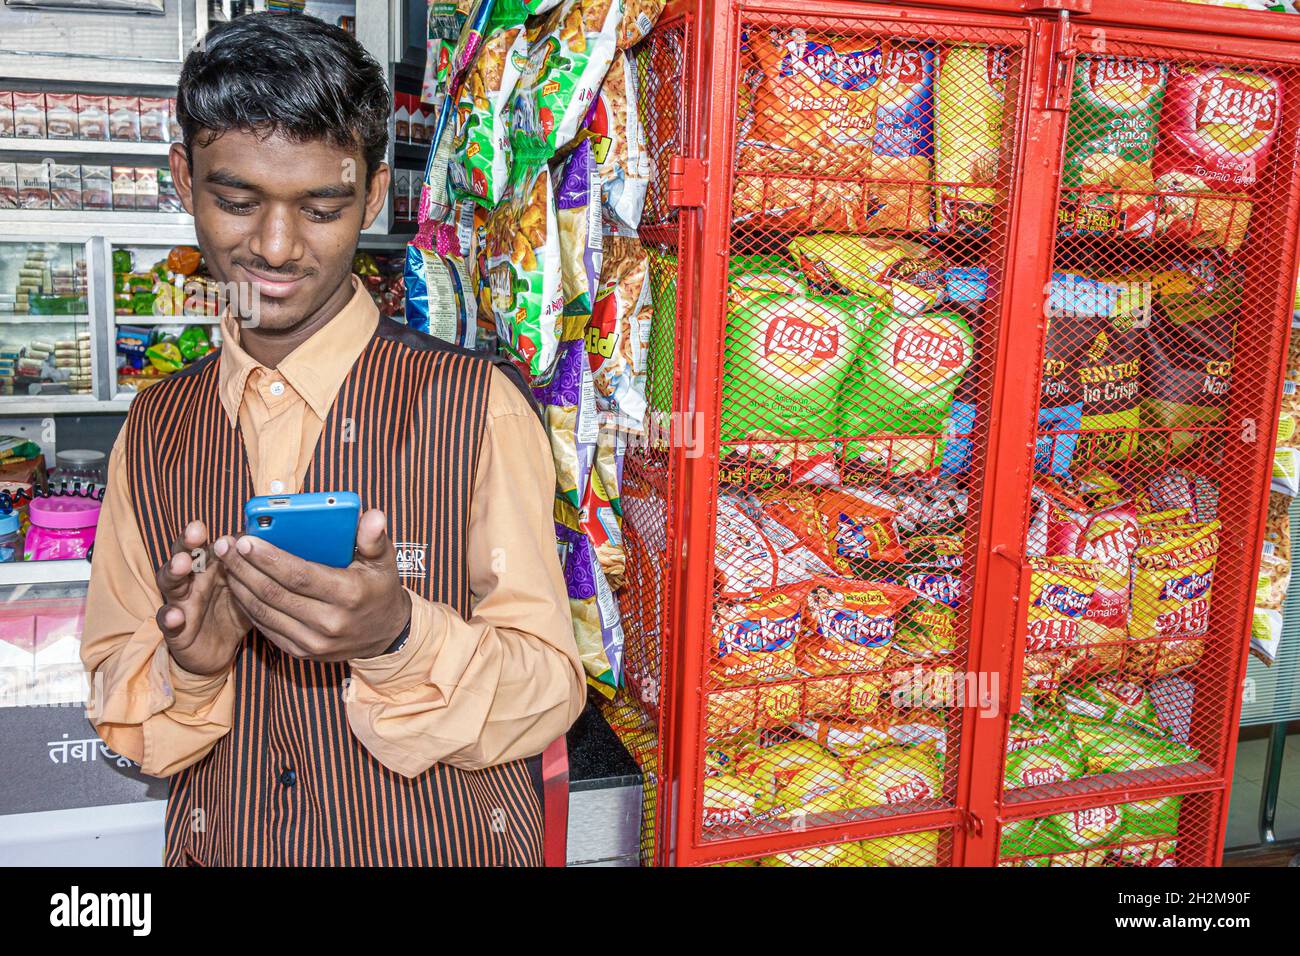 Mumbai India,Apollo Bandar Strand Road,manager convenience store,smartphone mobile phone texting looking messaging,junk food snack Lay's potato chips Stock Photo